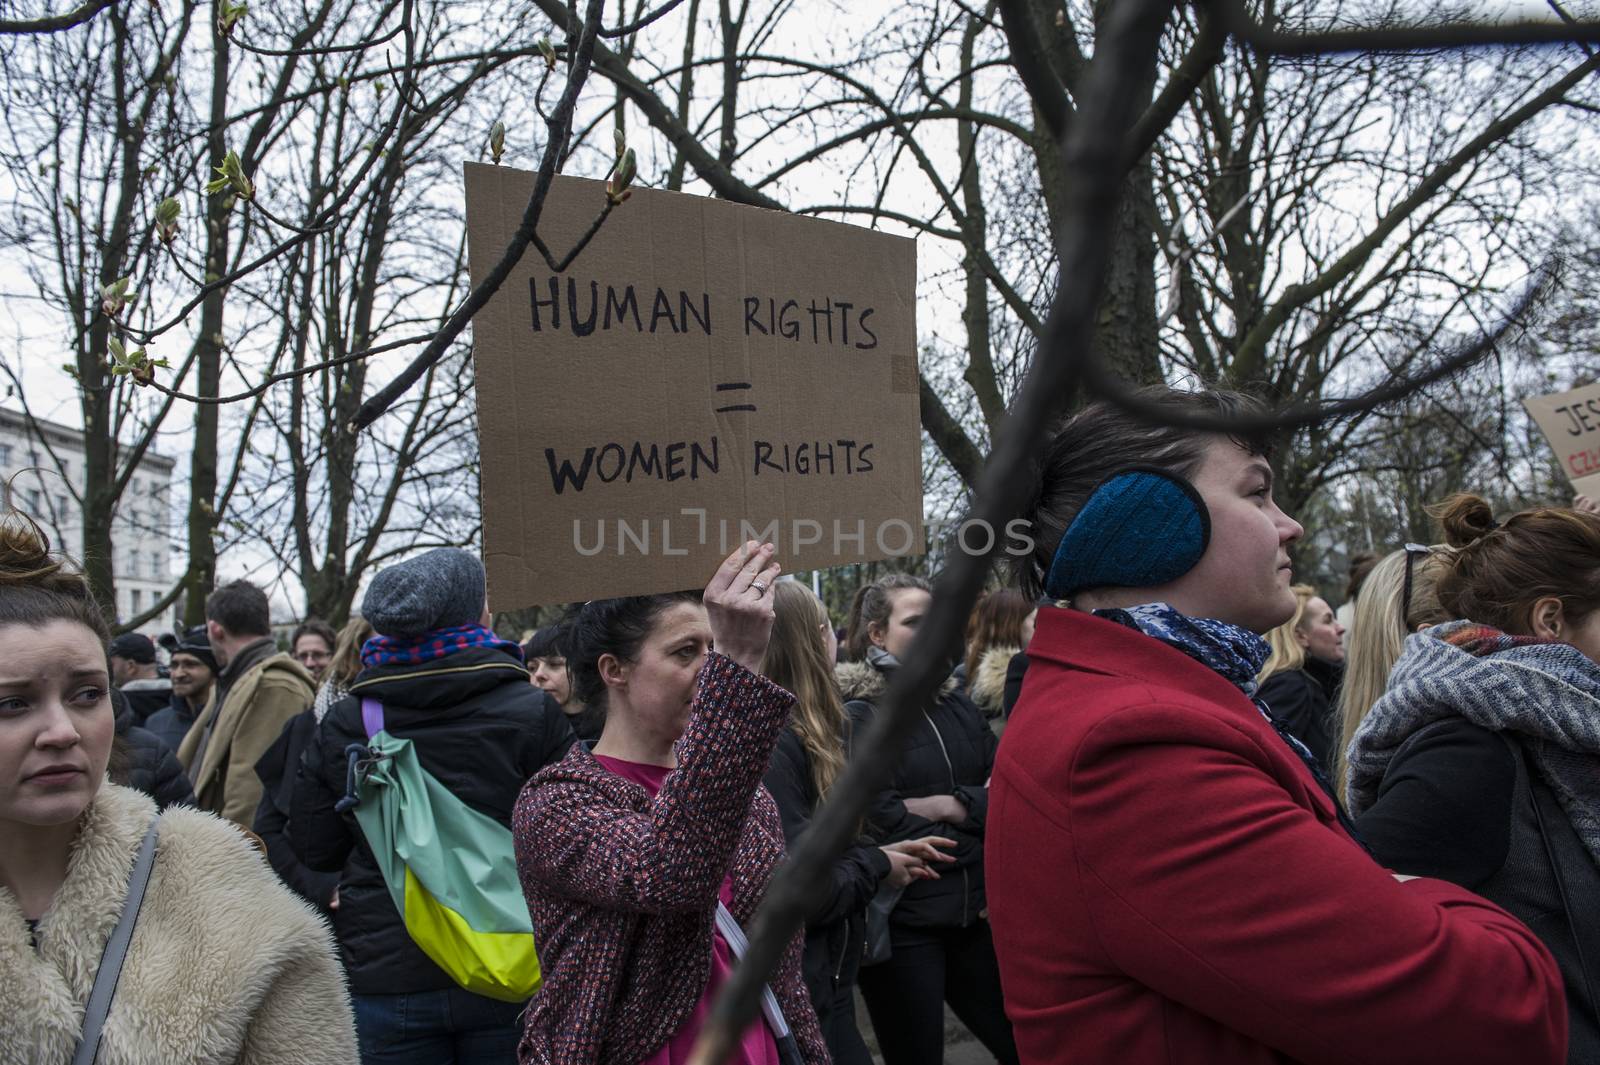 POLAND, Warsaw: People attend an anti-government and pro-abortion demonstration in front of parliament, on April 9, 2016 in Warsaw. The banner reads 'Human rights = women rights'. 